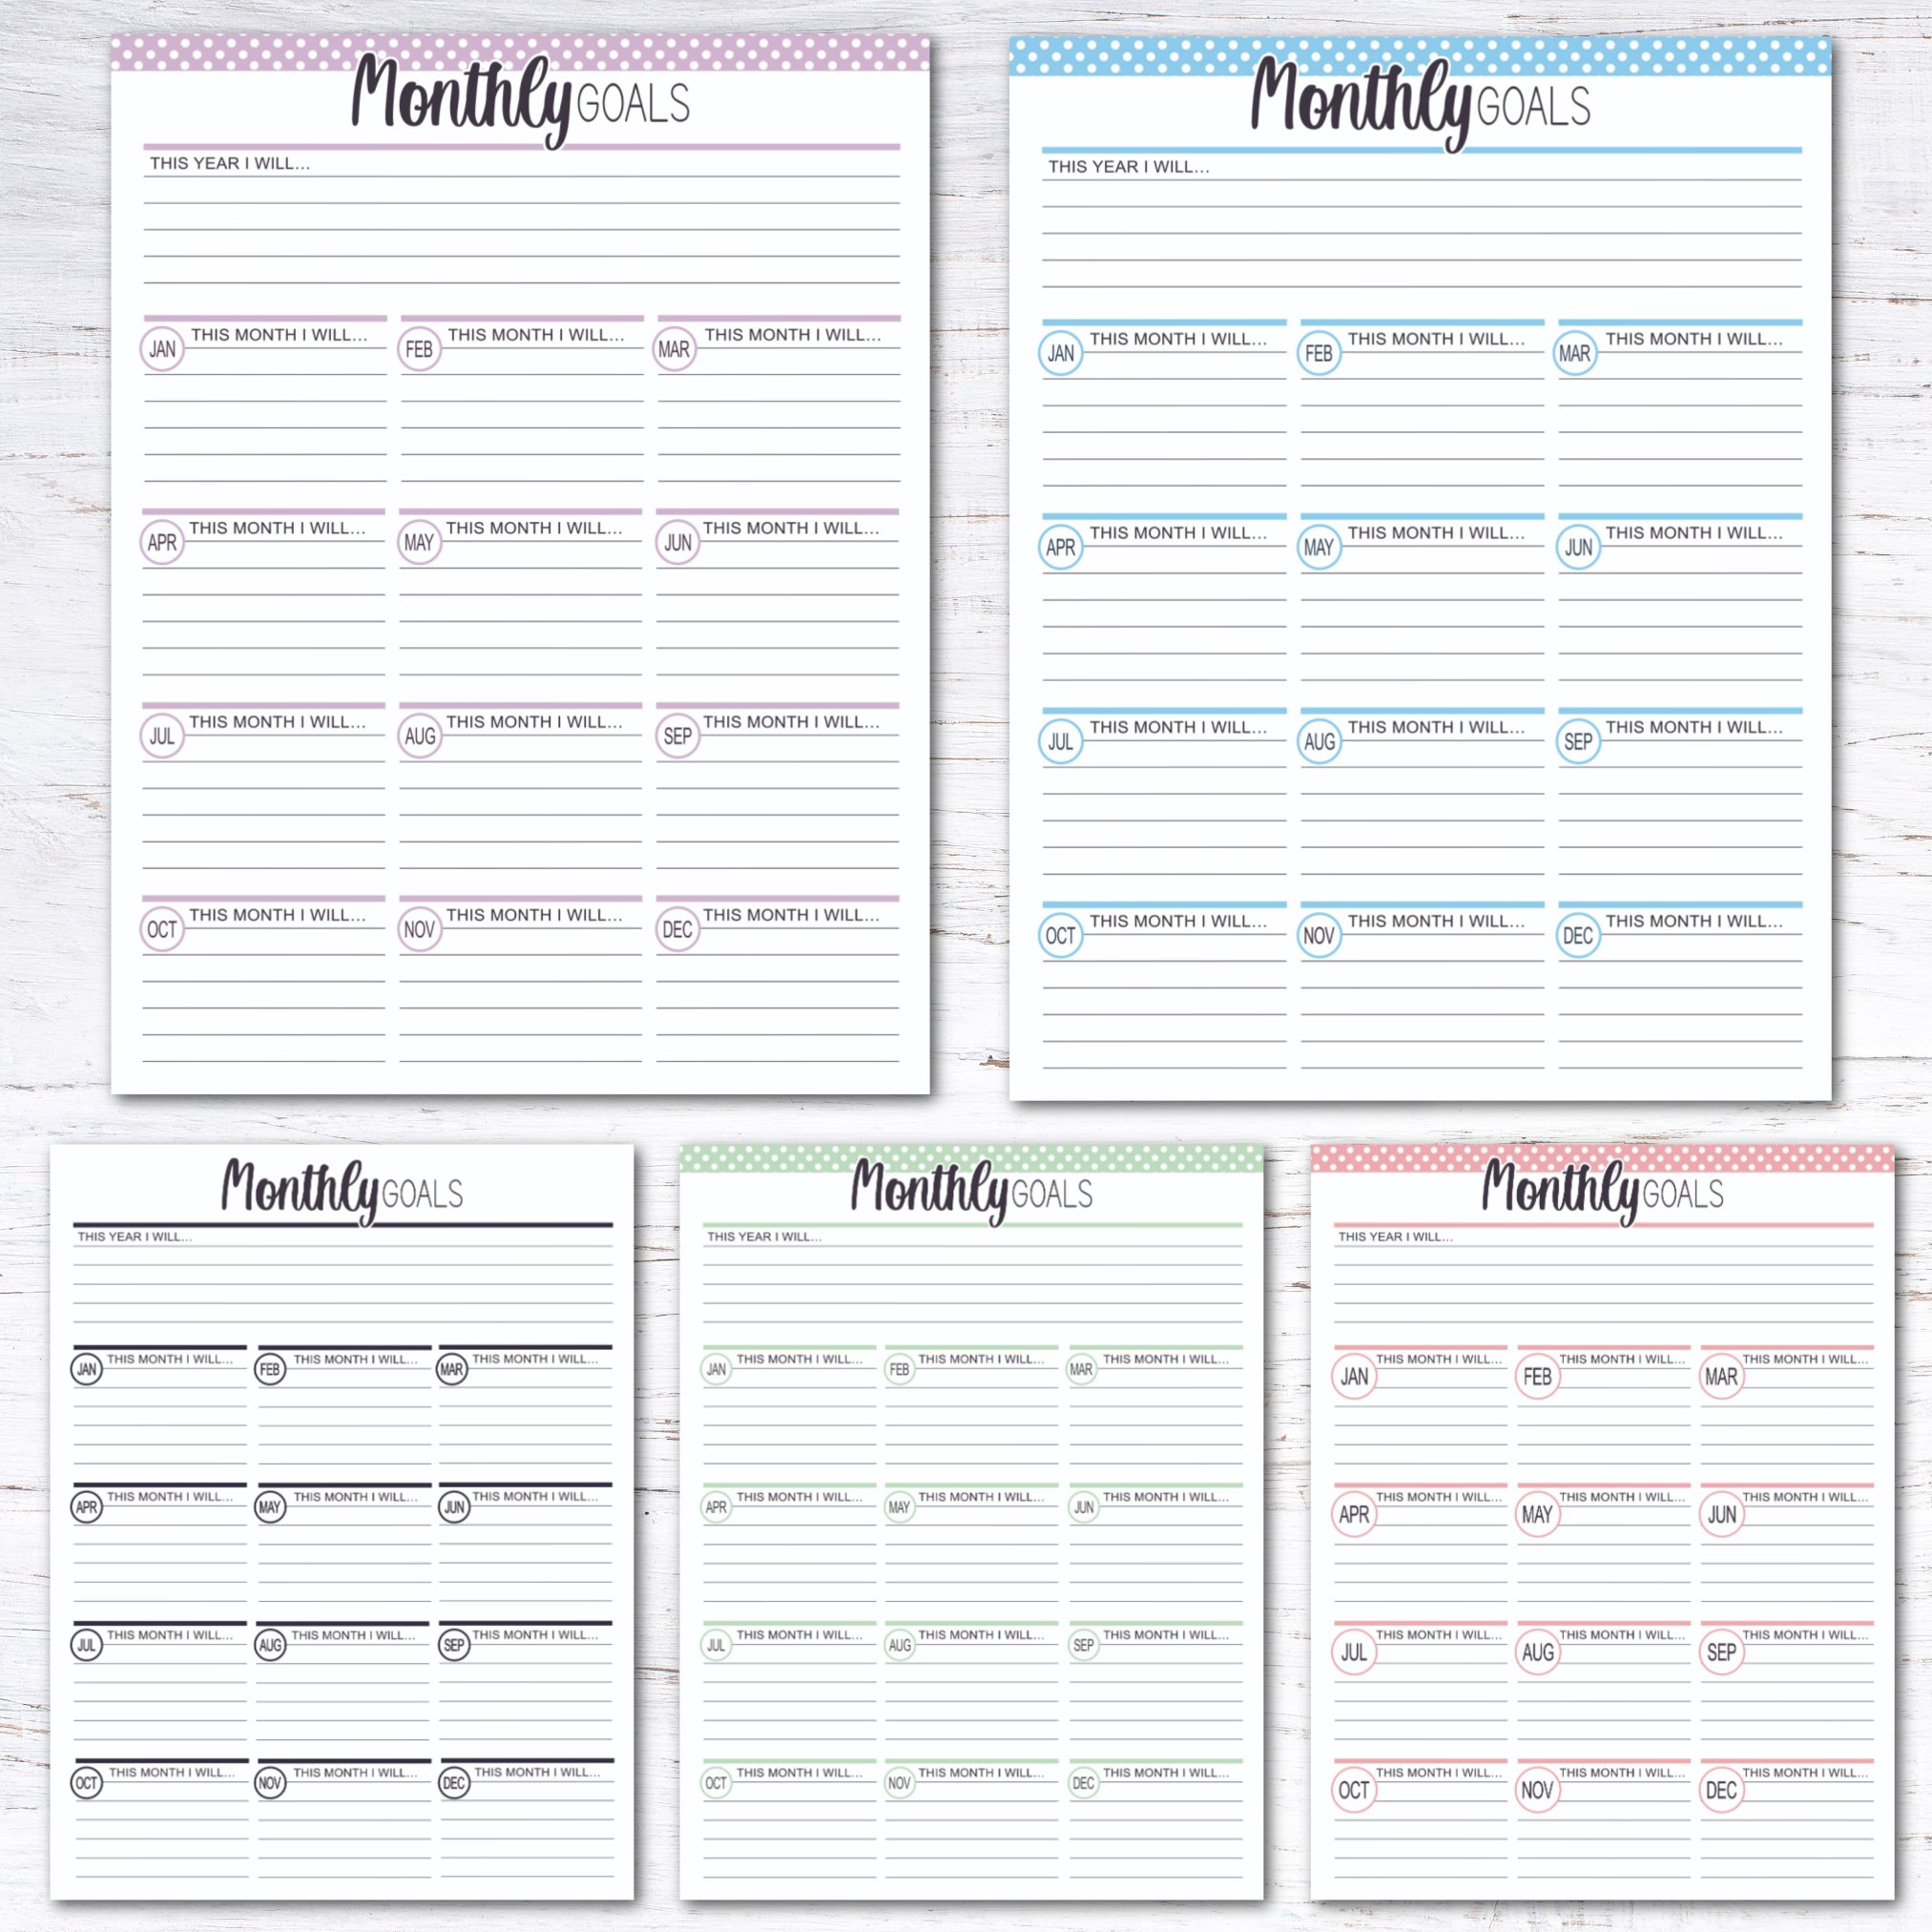 Monthly Goals Free Printable (Day 1)